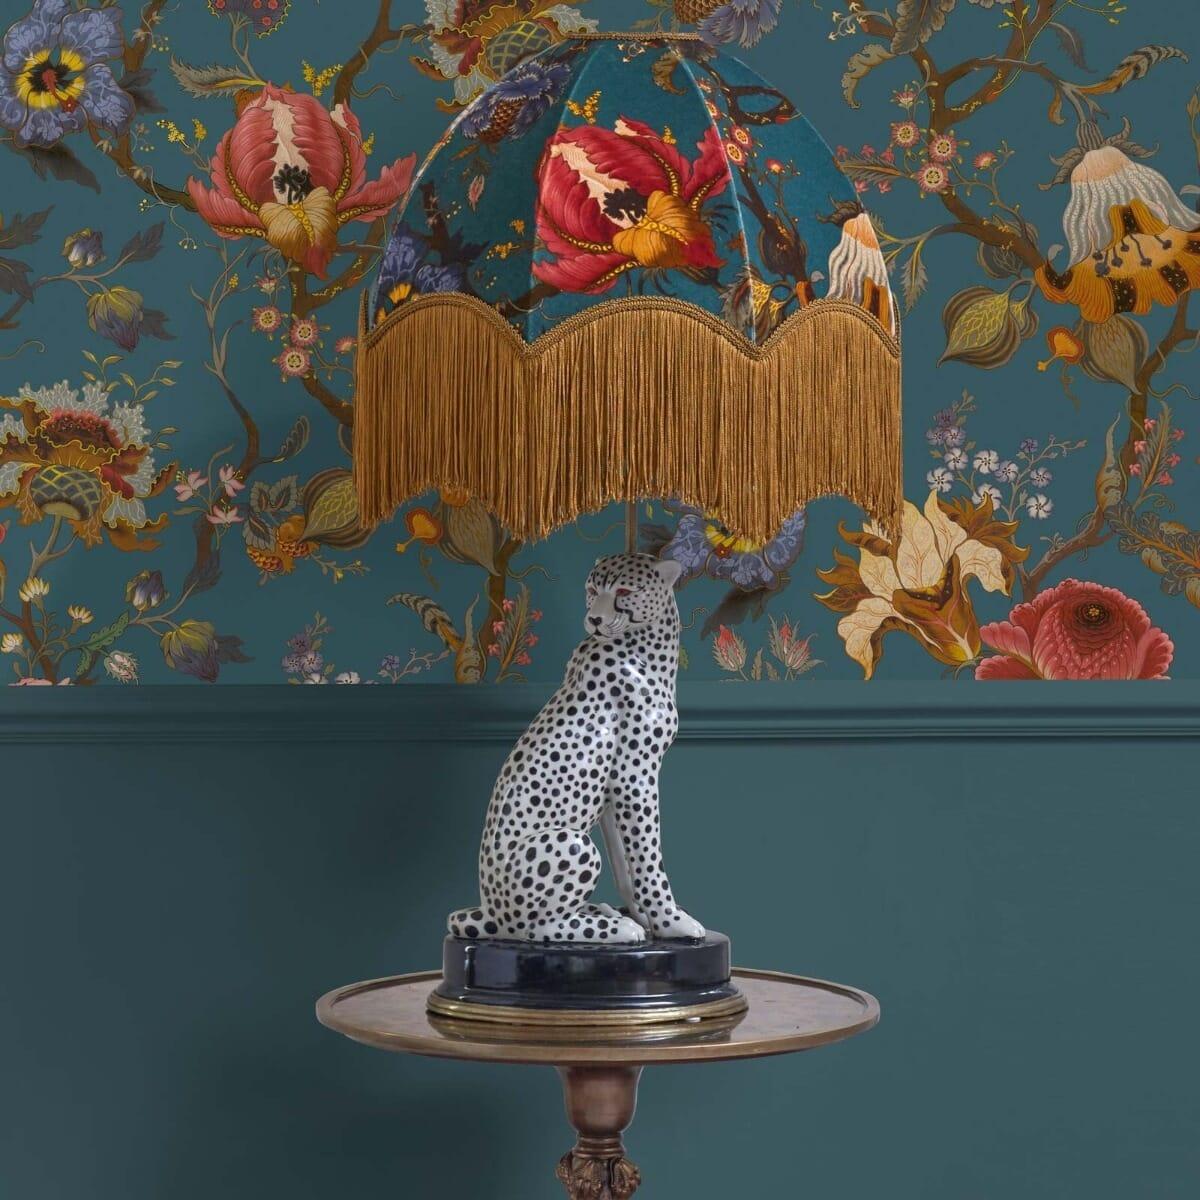 Bring the beauty of the animal kingdom into your home with this exquisite cheetah-shaped lamp-stand. Crafted from hand painted porcelain with a brass frame at the base, this love forever stand looks doubly stylish when paired with one of our printed